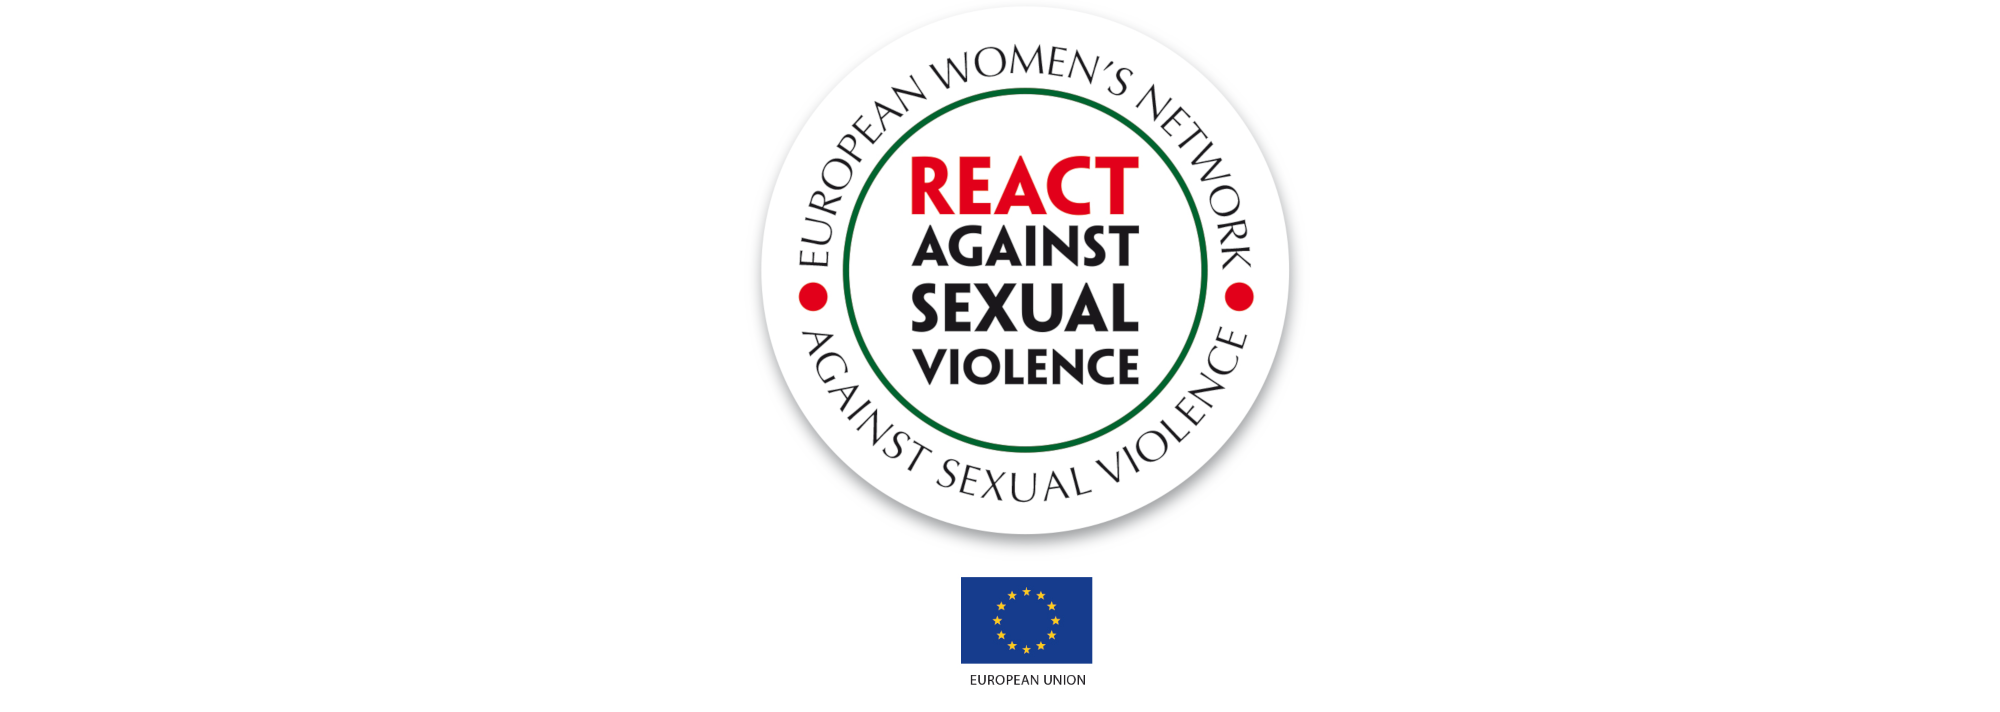 European womens network against sexual violence